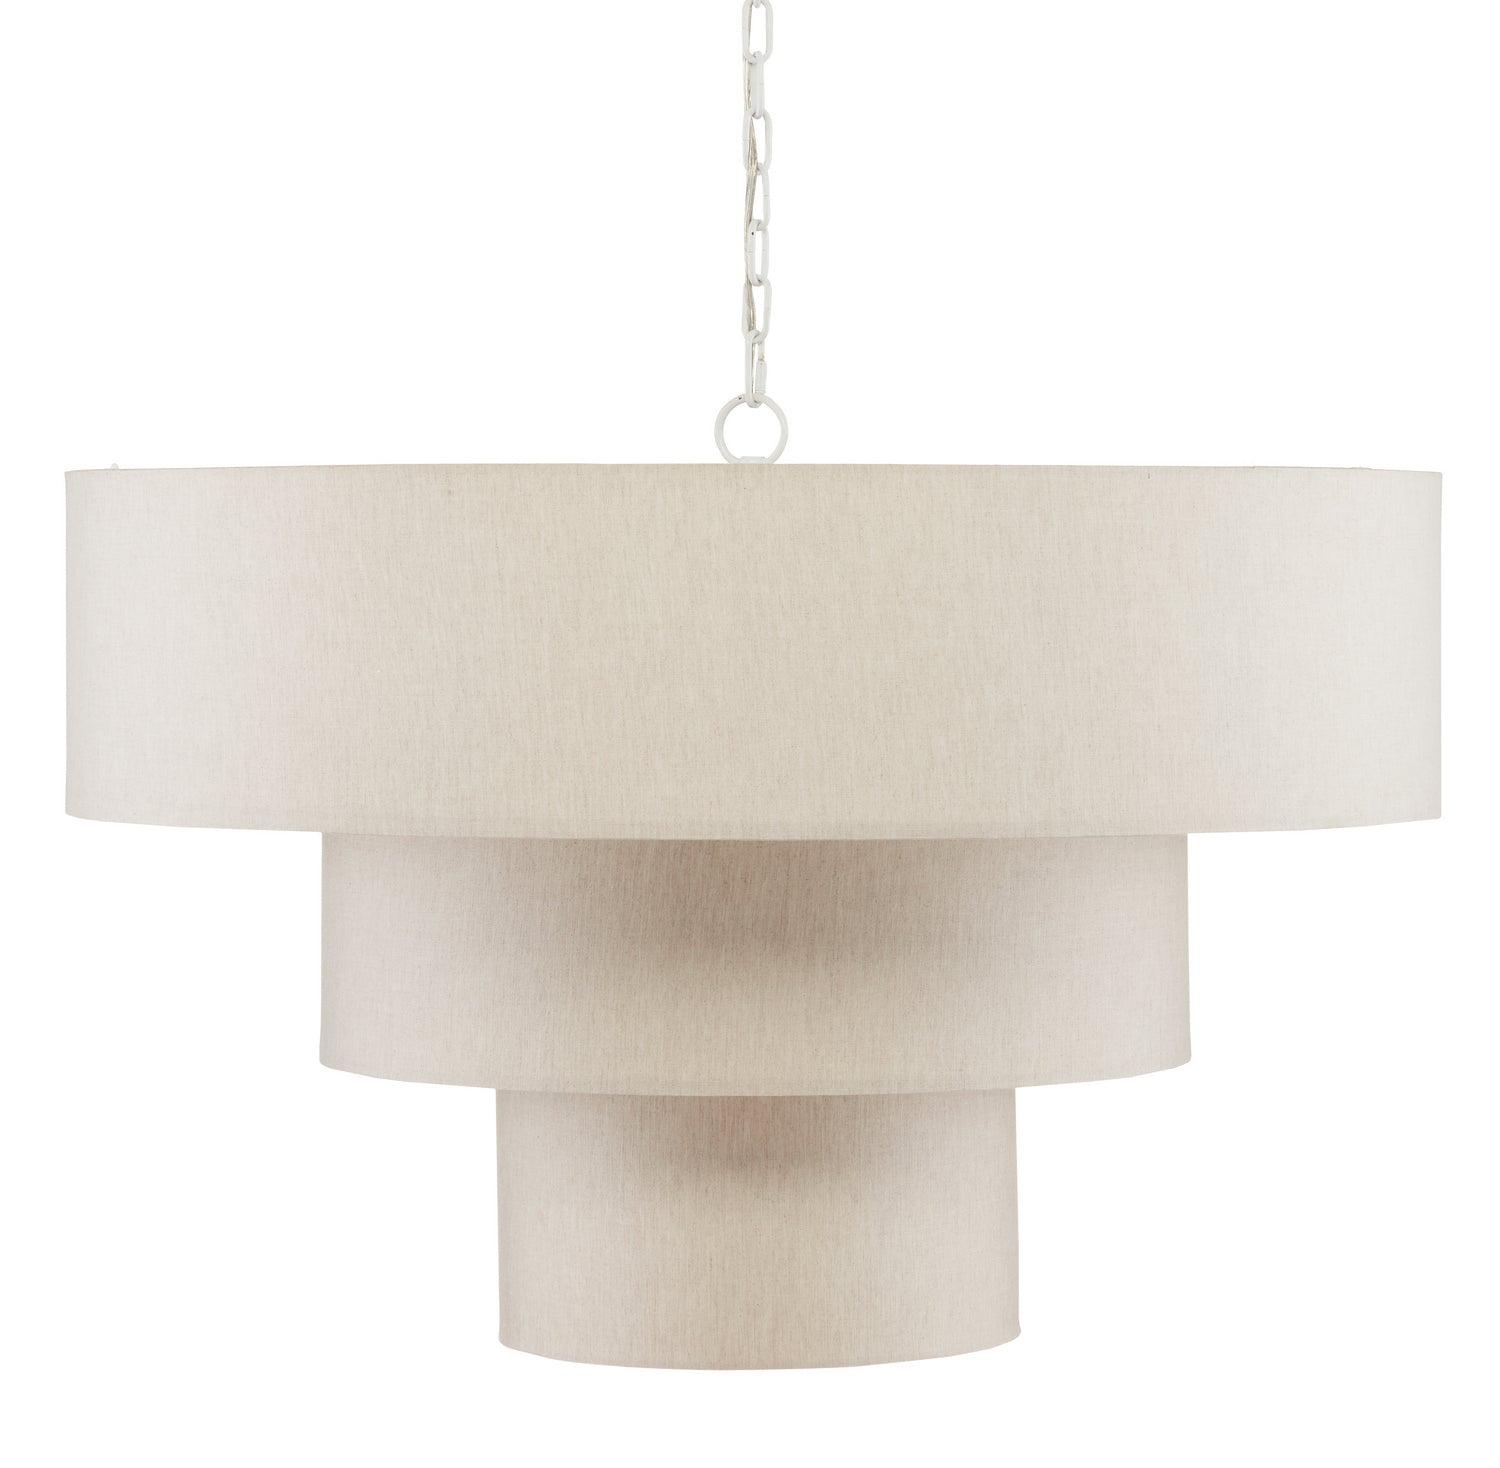 Nine Light Chandelier from the Livello collection in White/Linen finish